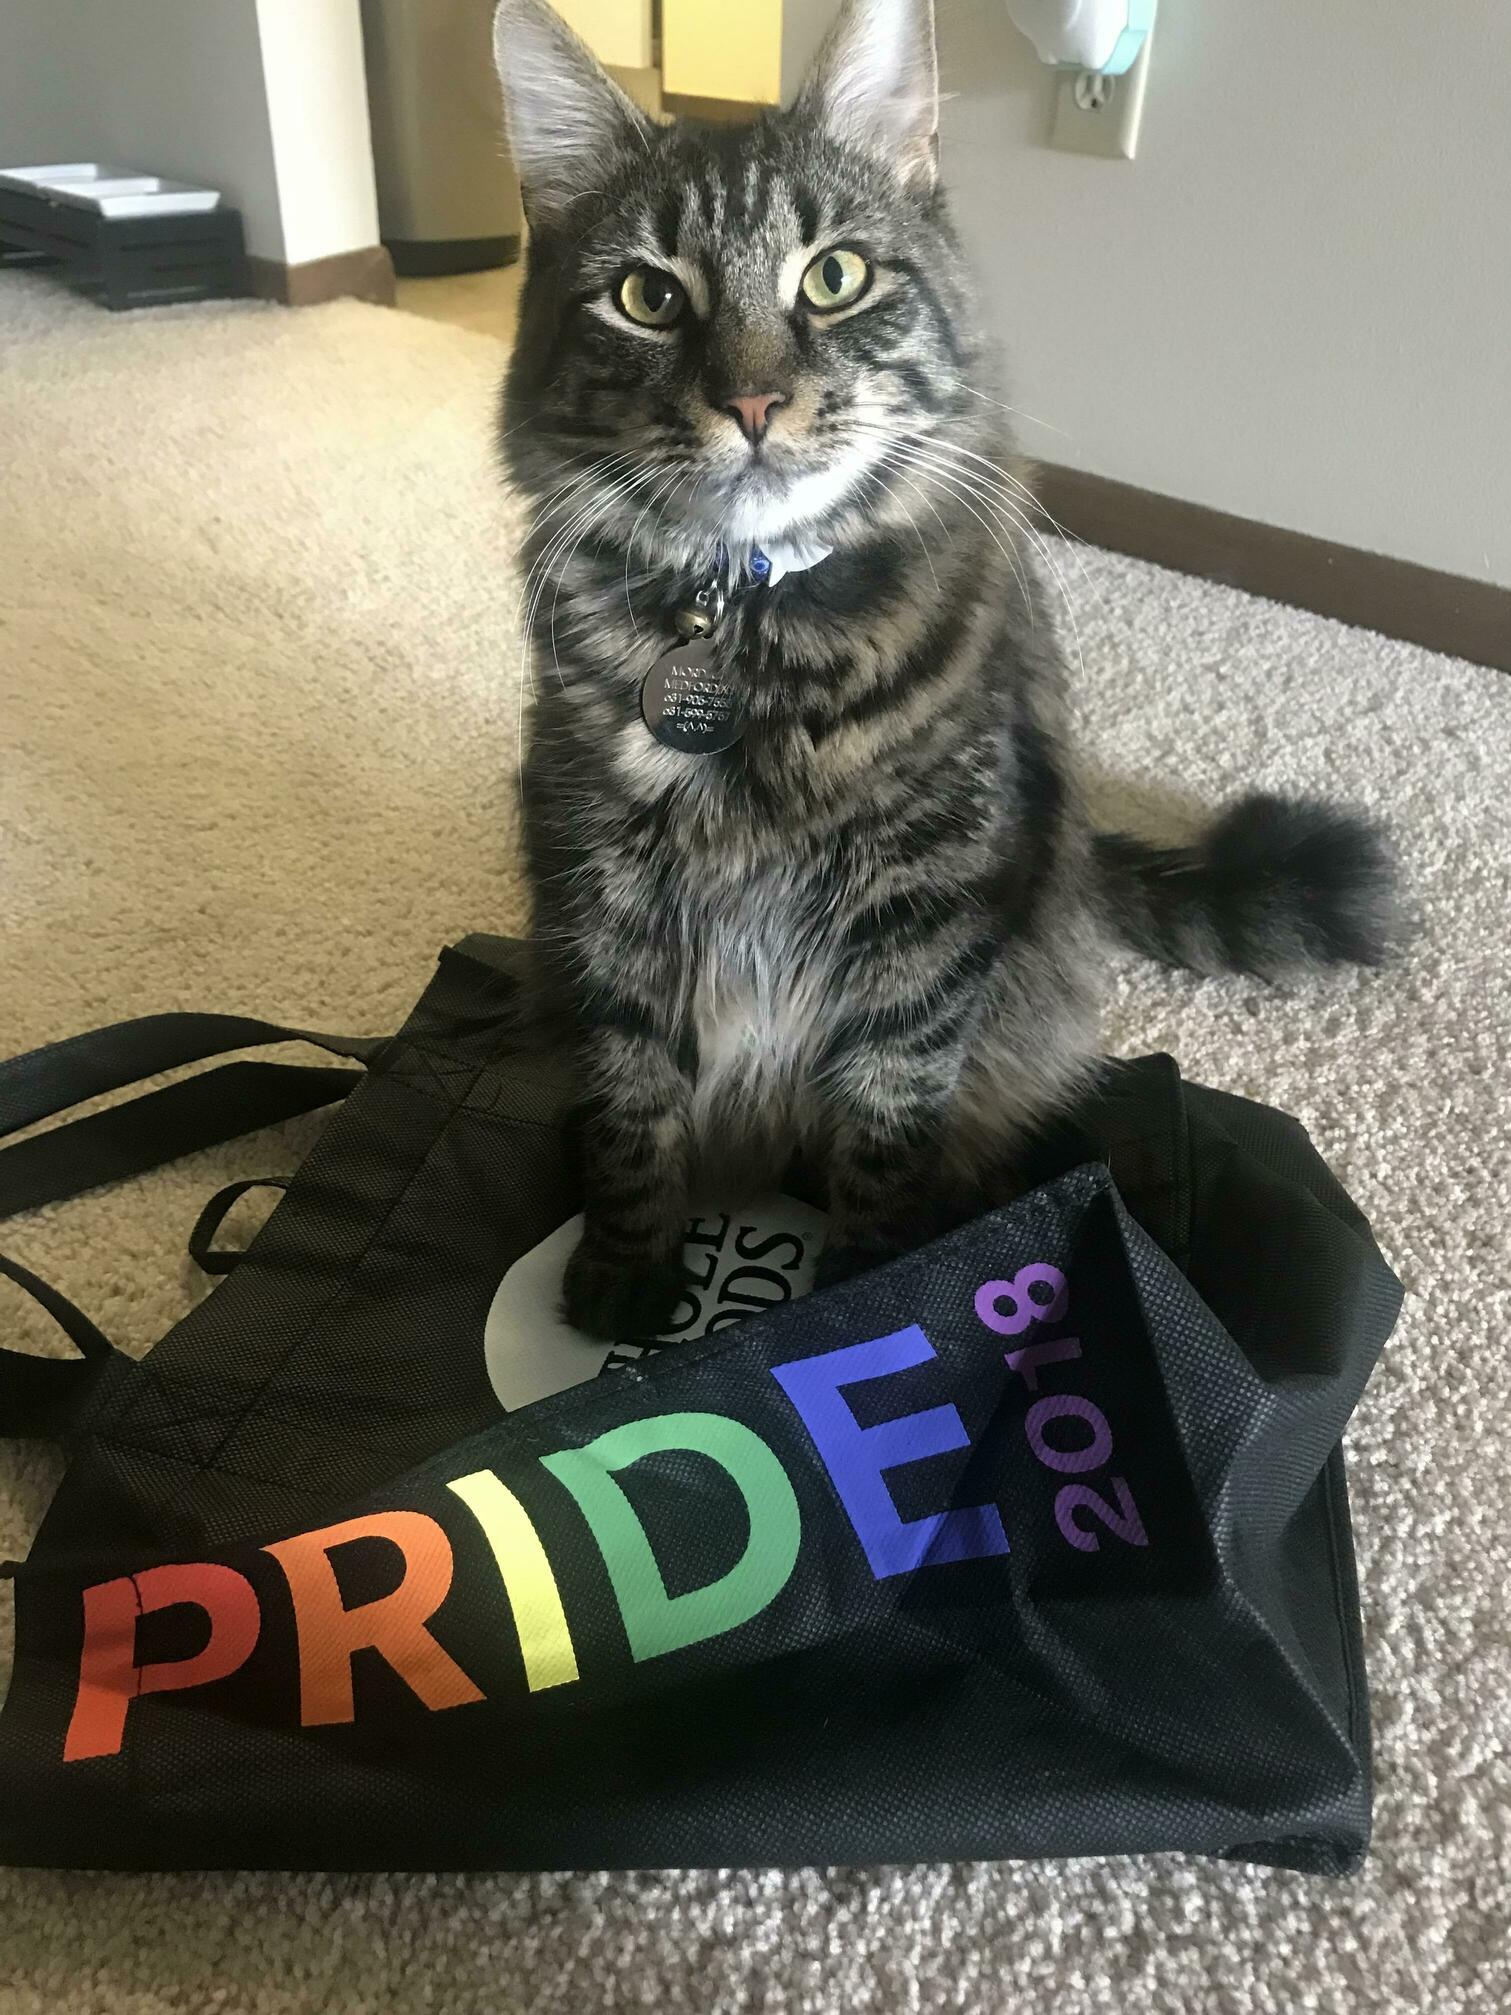 Pride month may be over but mordecai still celebrates!